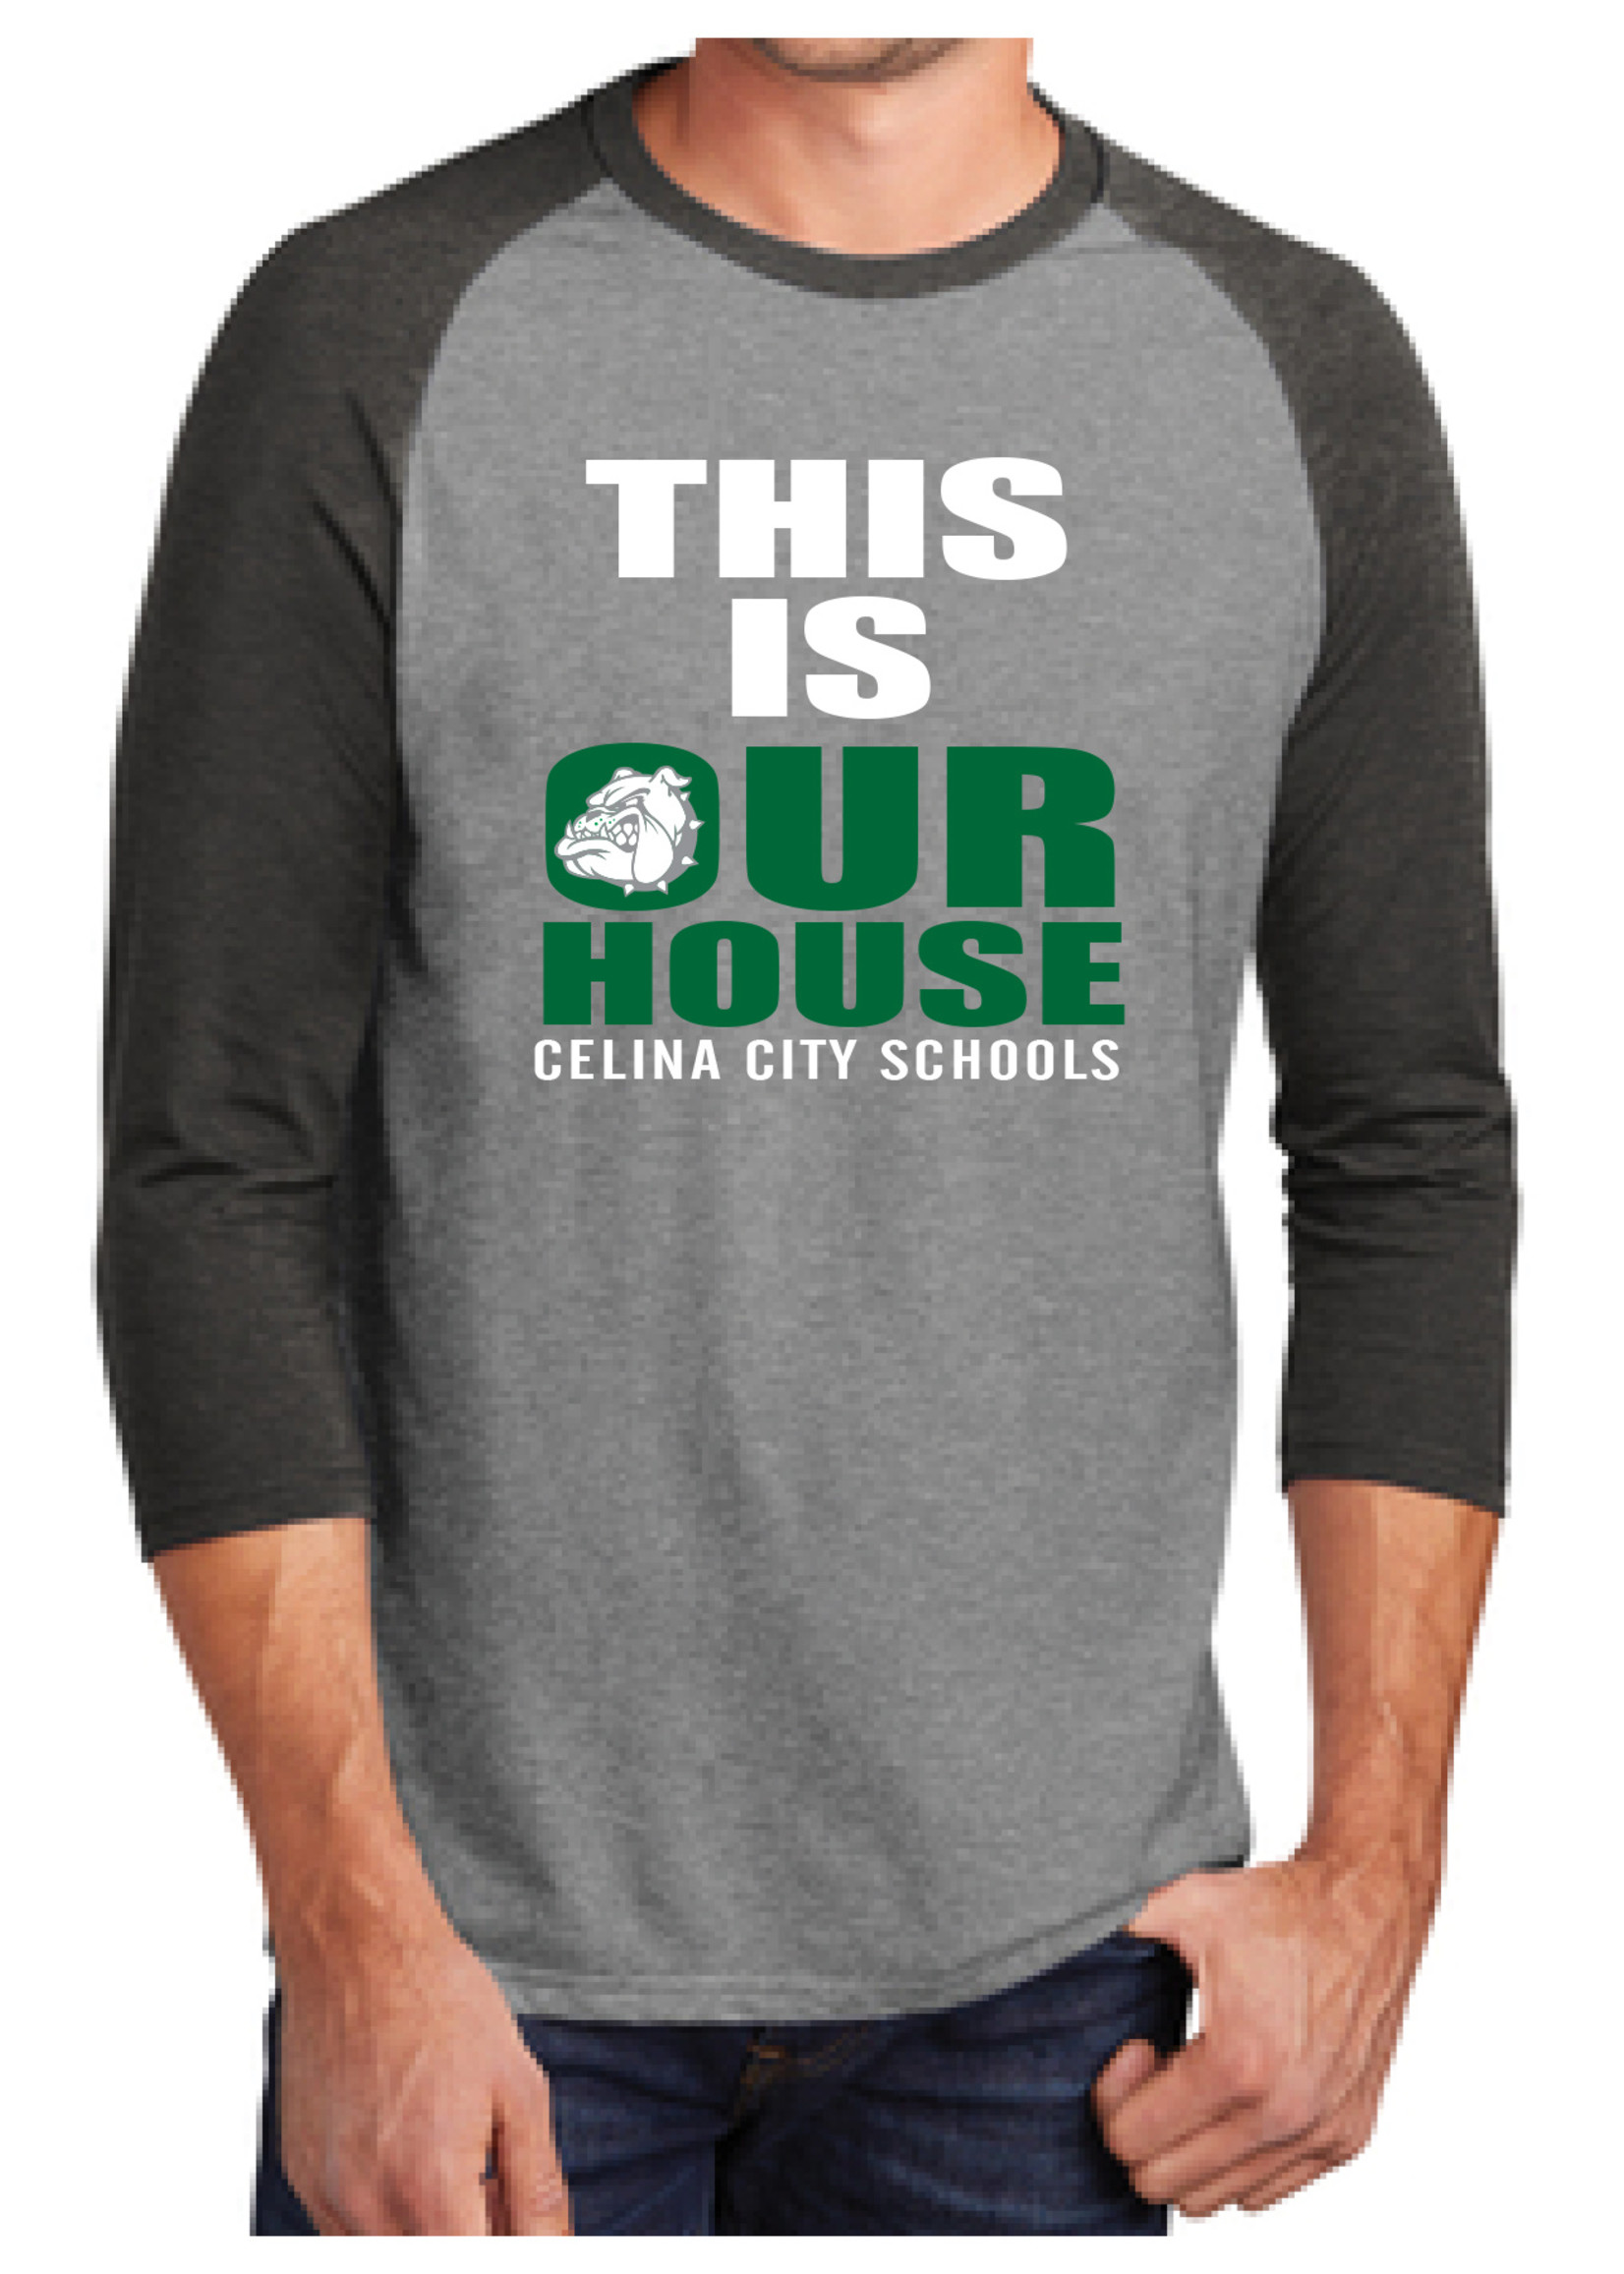 CELINA CITY SCHOOLS - This is Our House